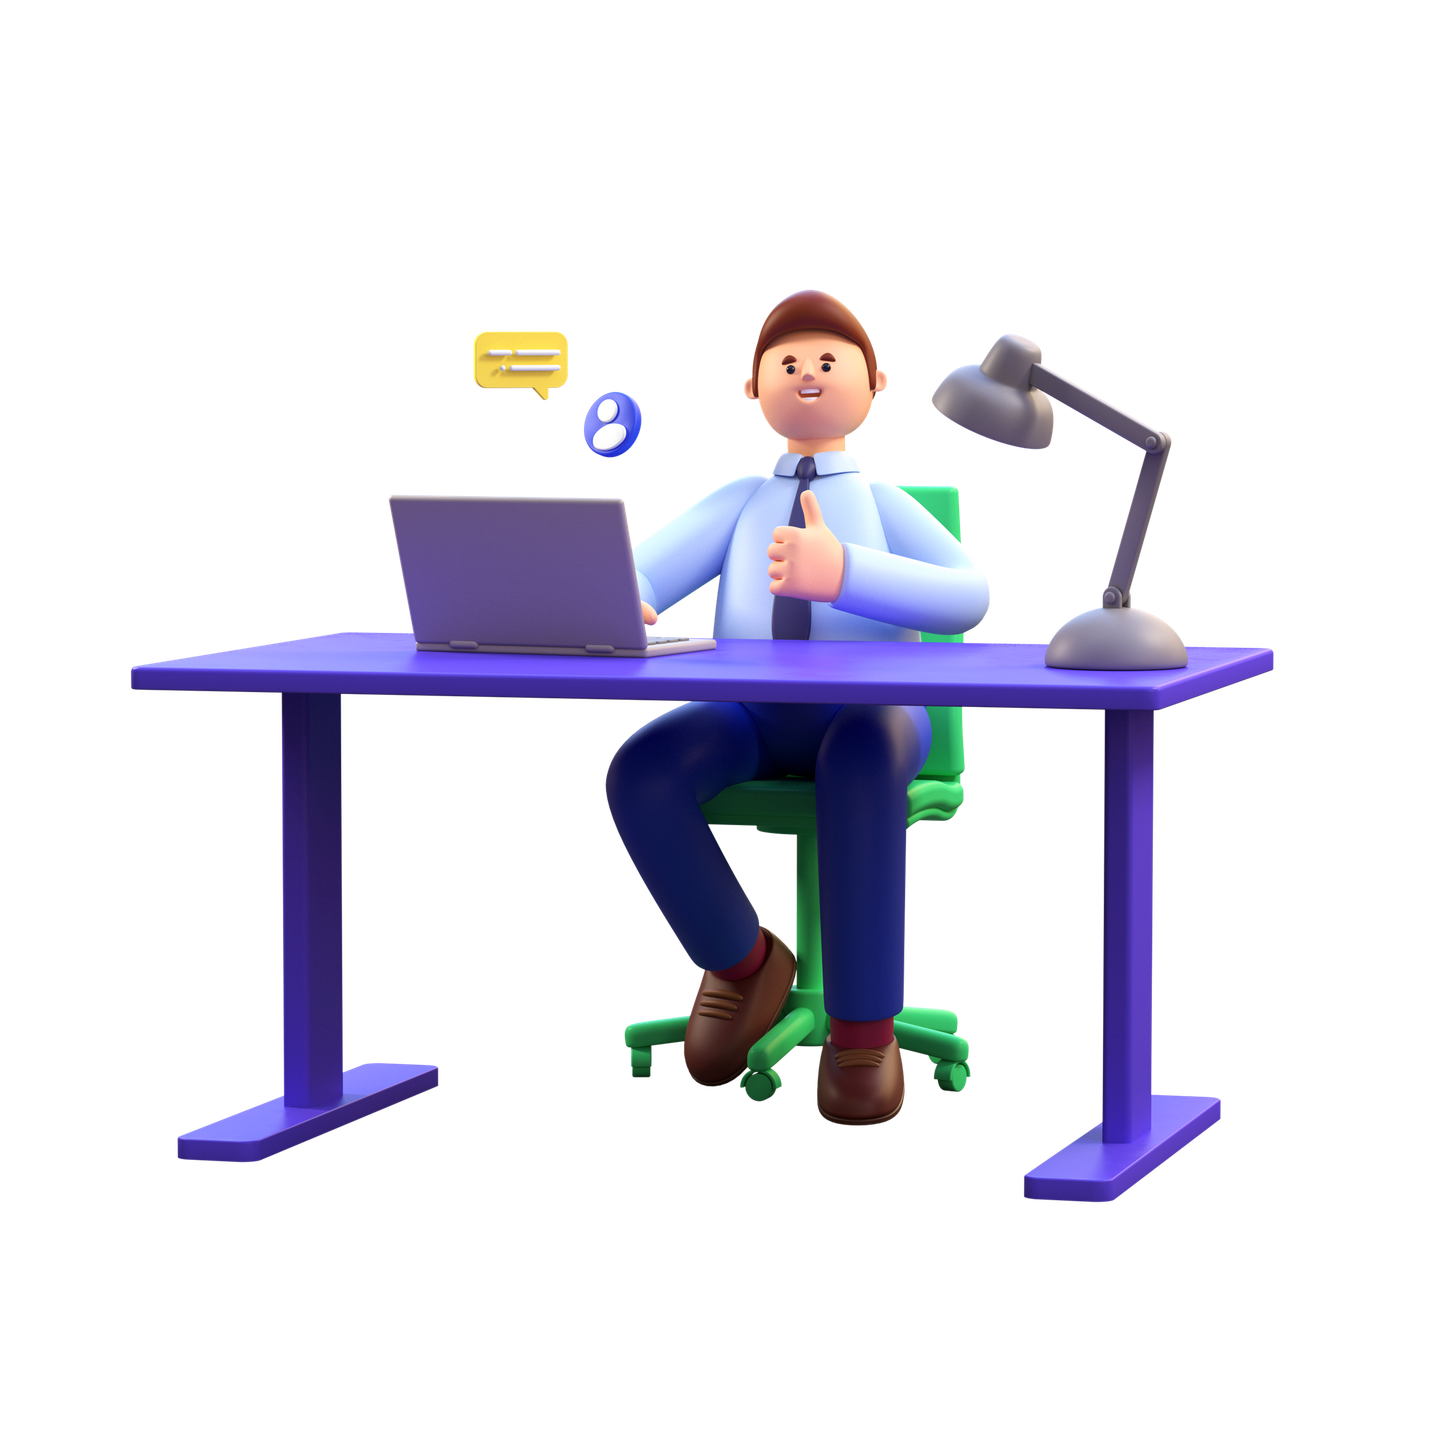 https://cdn.iconscout.com/wordpress/2021/03/businessman-working-in-office.png